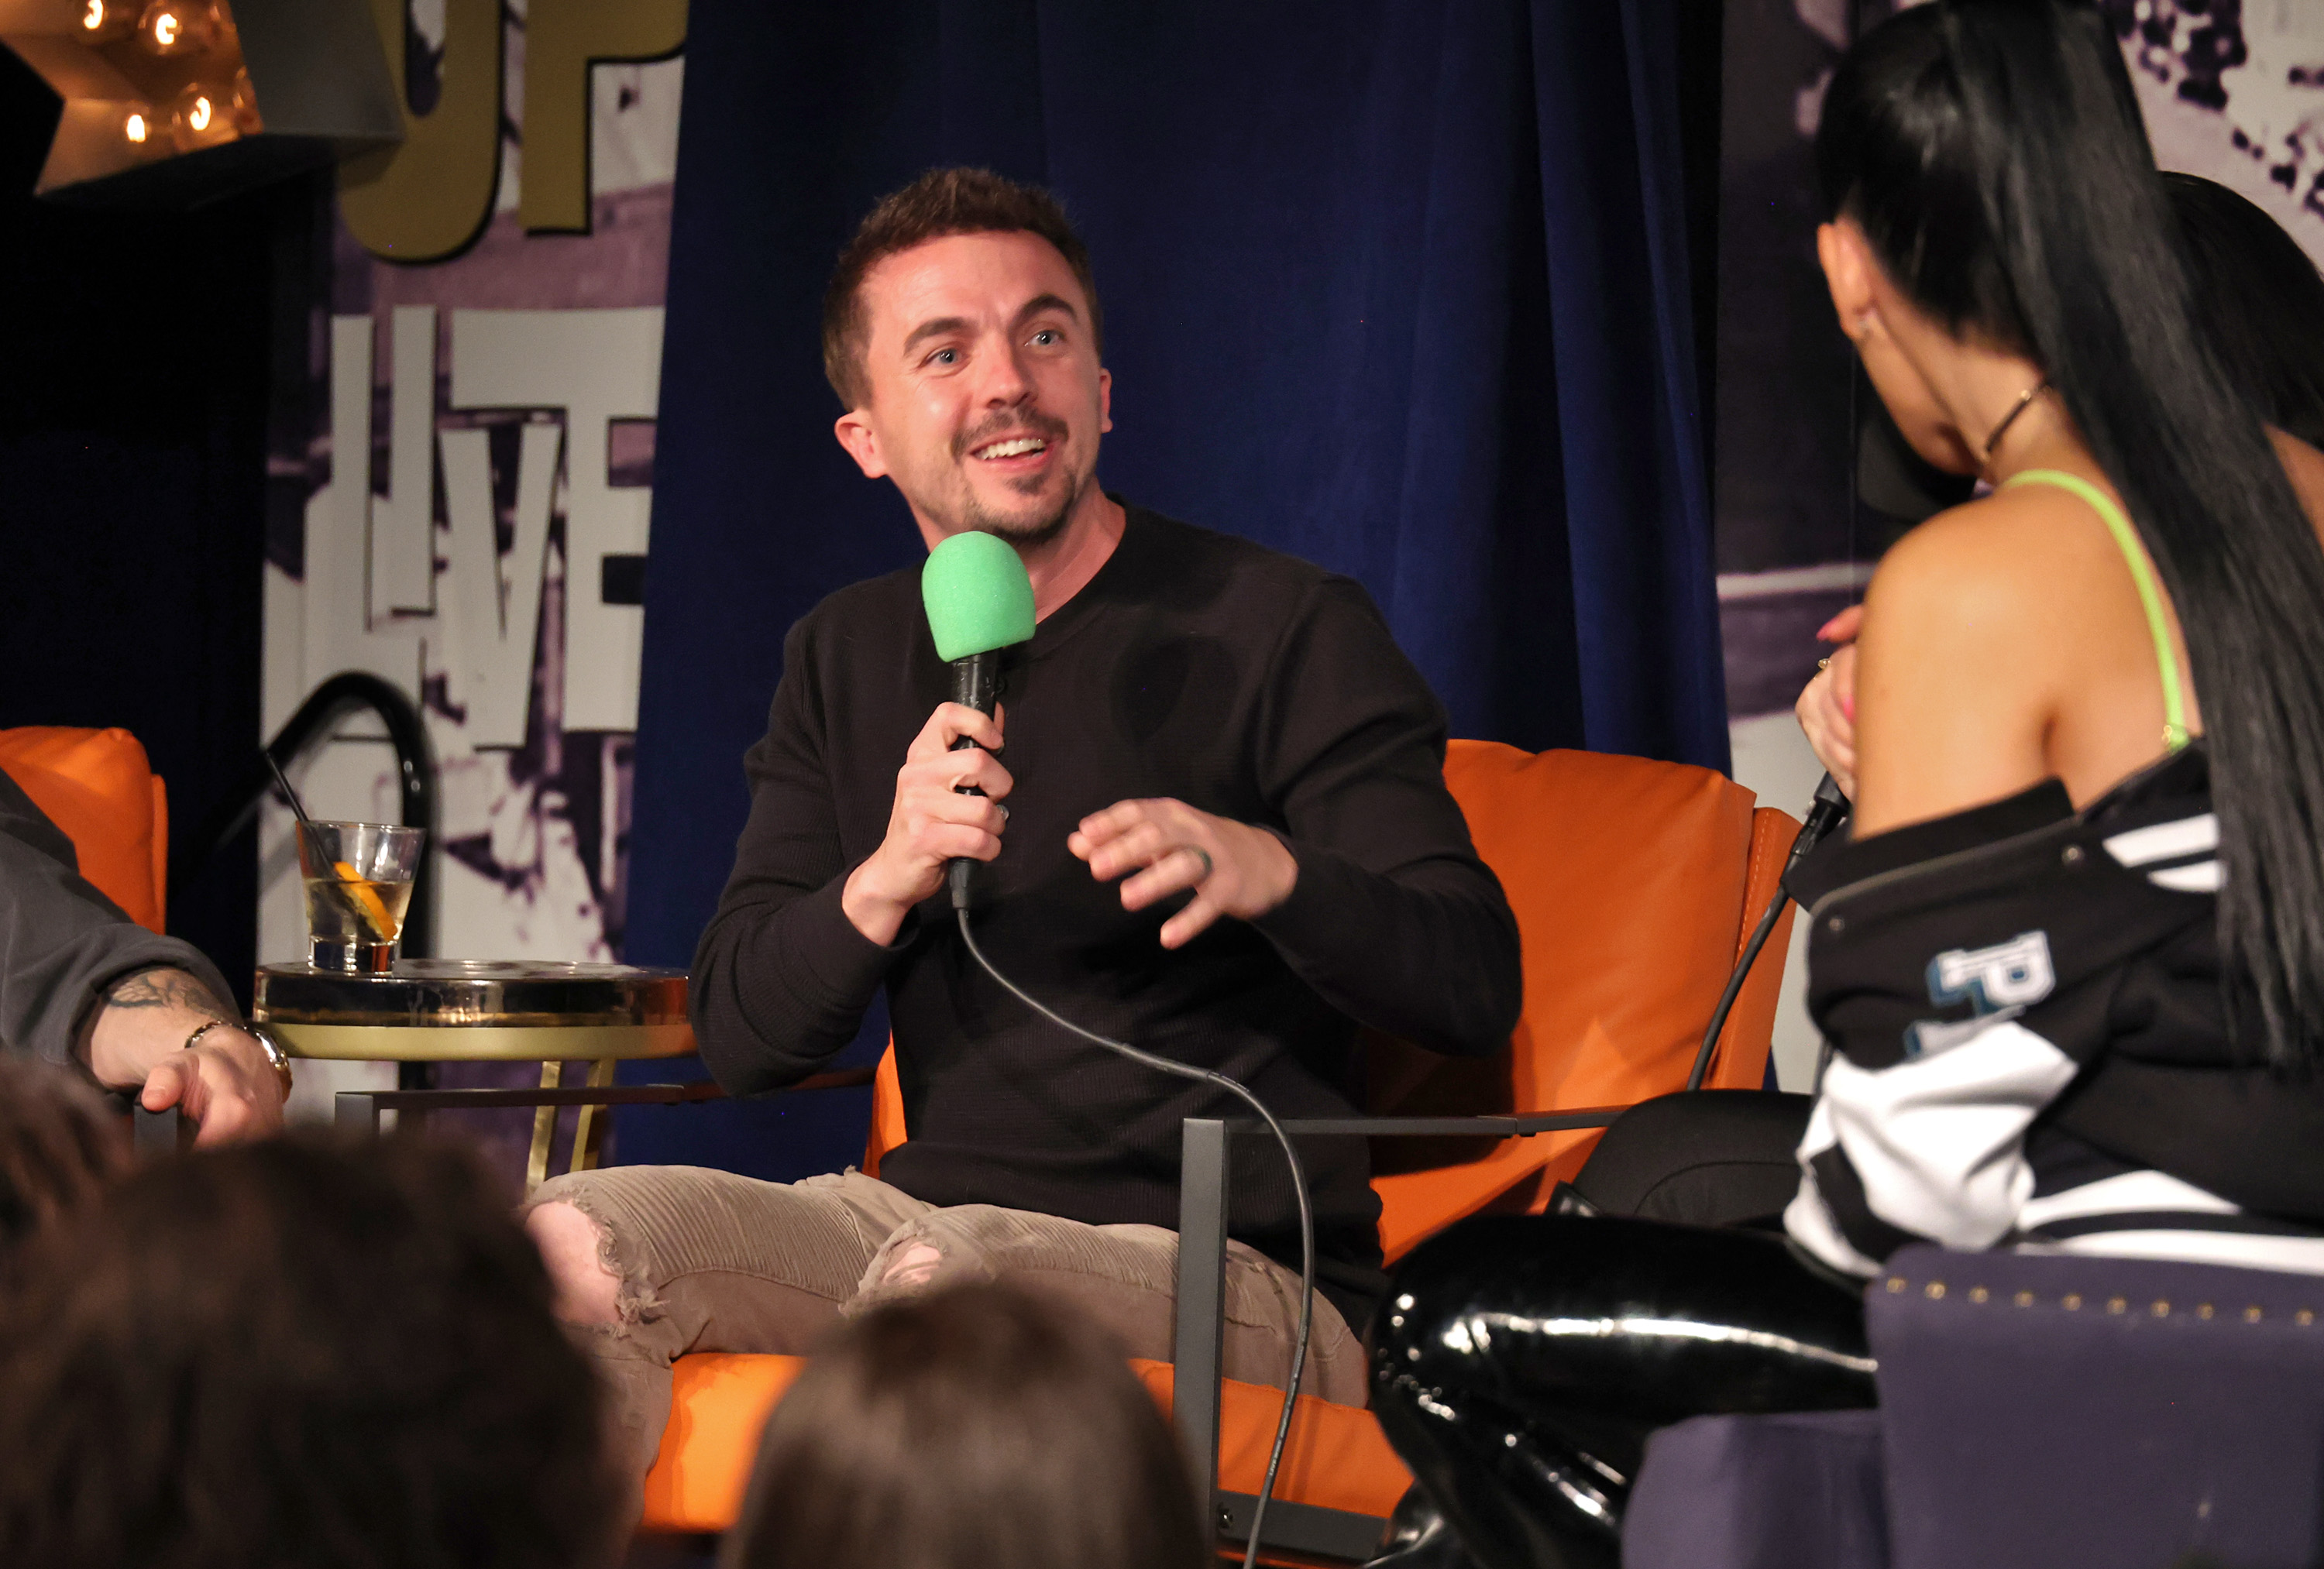 Frankie Muniz during Brie and Nikki Bella's live edition of "The Bellas Podcast" on February 8, 2023 in Phoenix, Arizona | Source: Getty Images